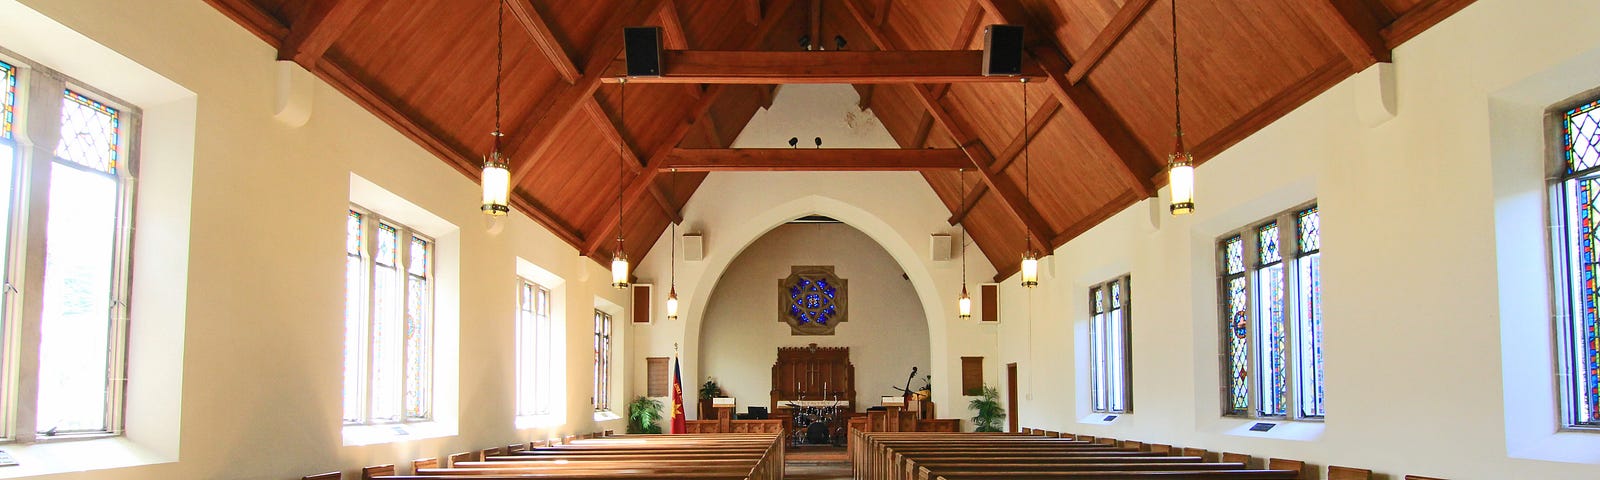 The interior of a church with wooden ceiling, pews, and windows on both sides of the wall.